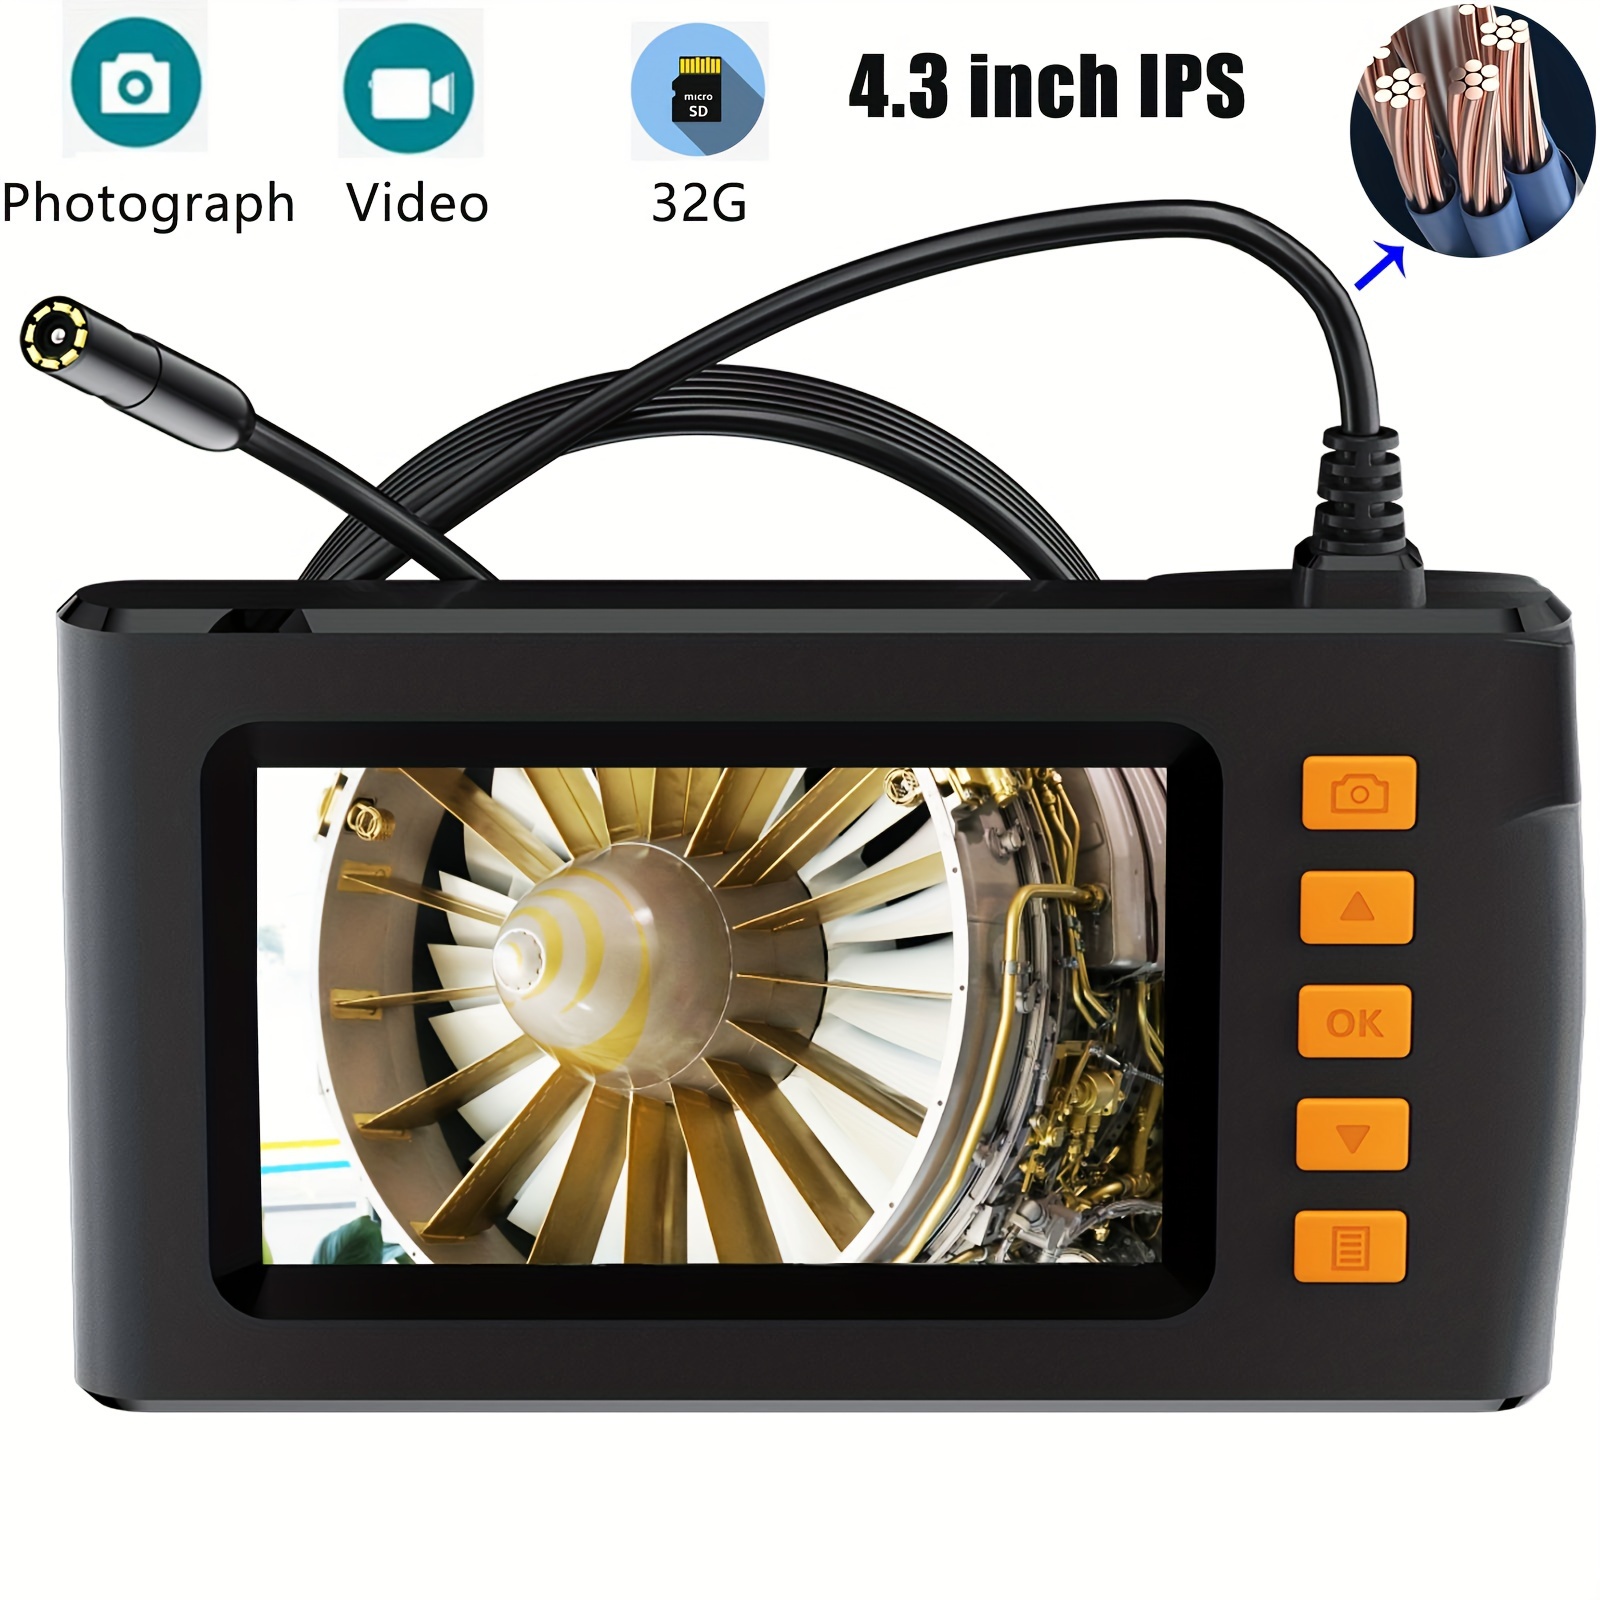 Industrial Endoscope, 1080P HD Digital Borescope Inspection Camera with 8mm  IP67 Waterproof Camera, Sewer Camera with 2.8 IPS Screen, 16.5FT